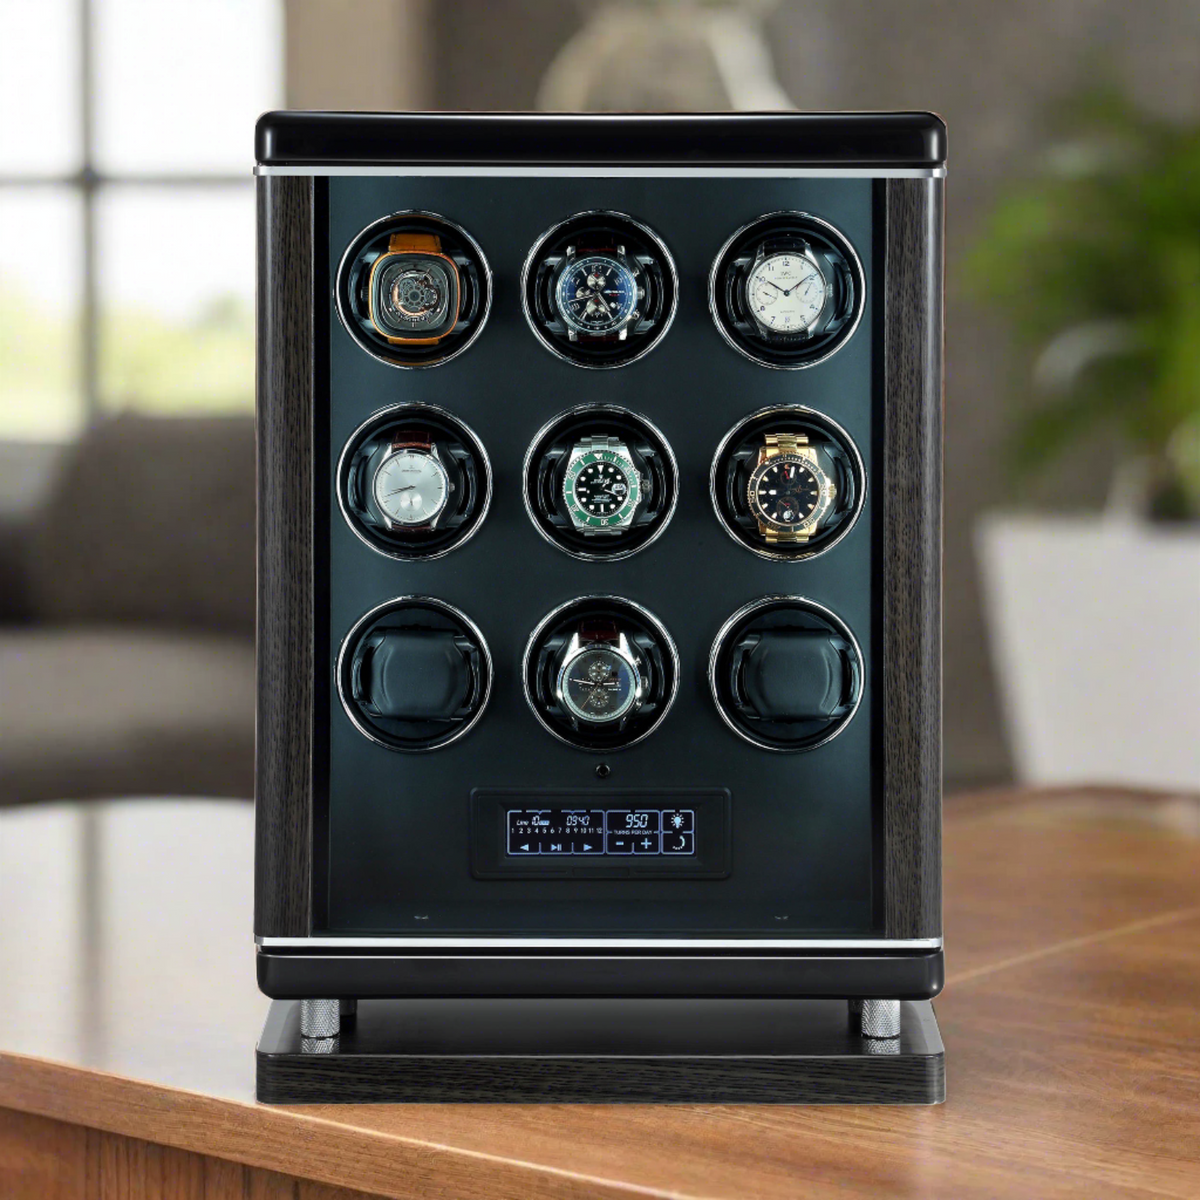 9 Watch Winder for Automatic Watches with BioMetric Technology by Tempus